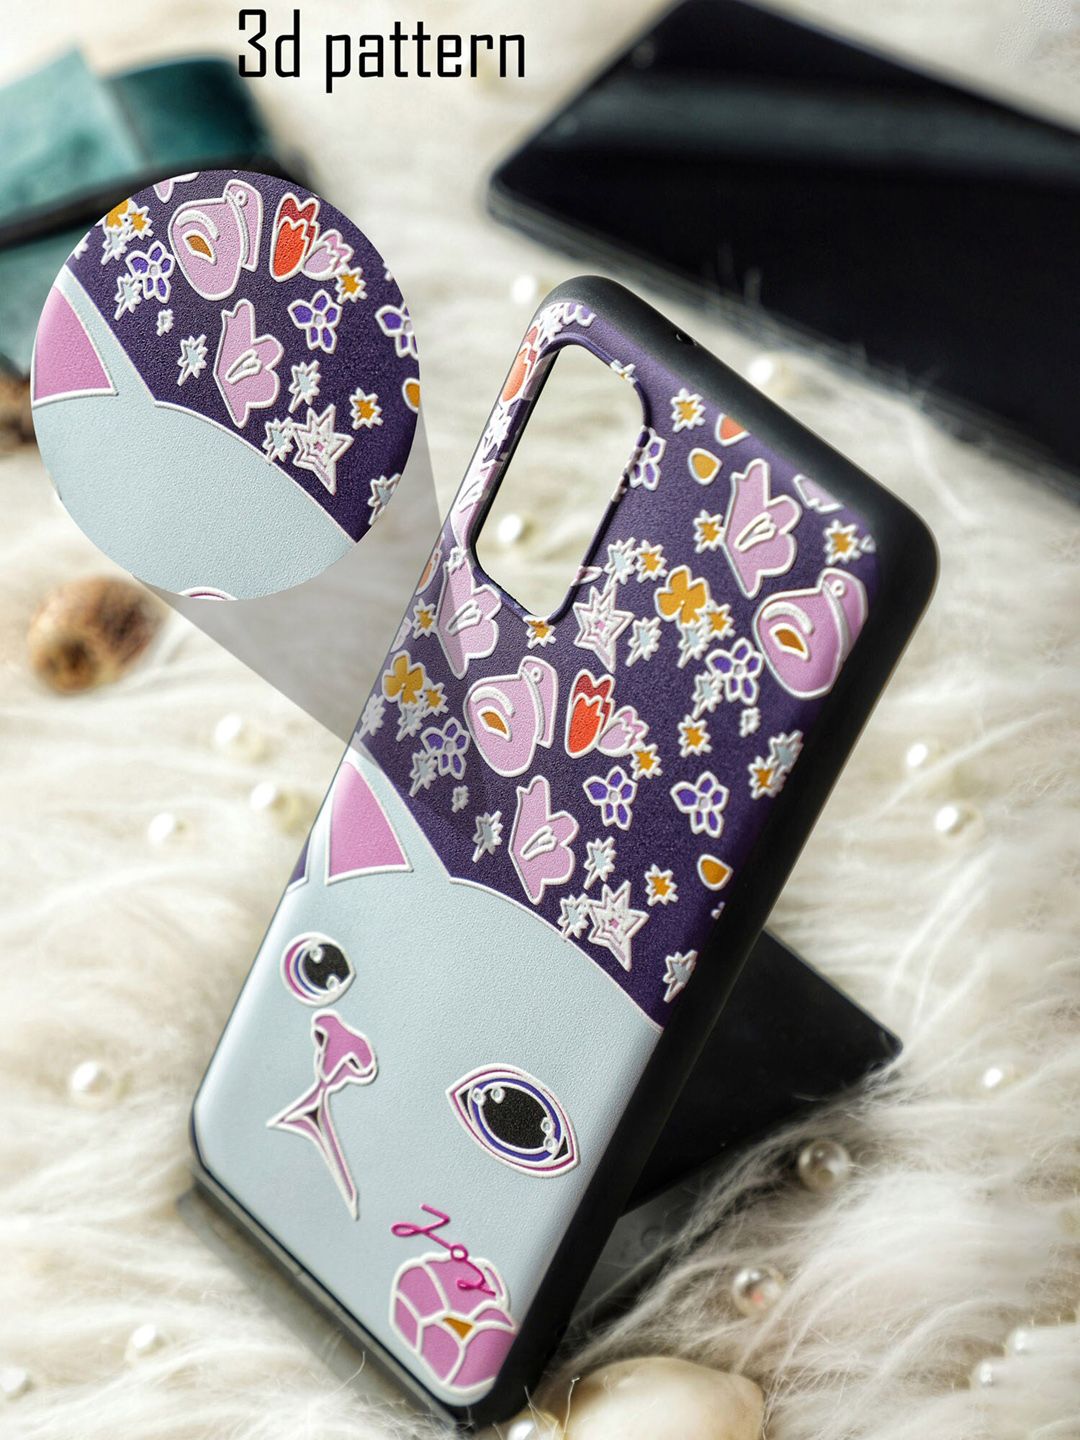 DOOBNOOB Violet Kitty Blossom 3D Patterned Samsung Galaxy S20 Back Case Price in India